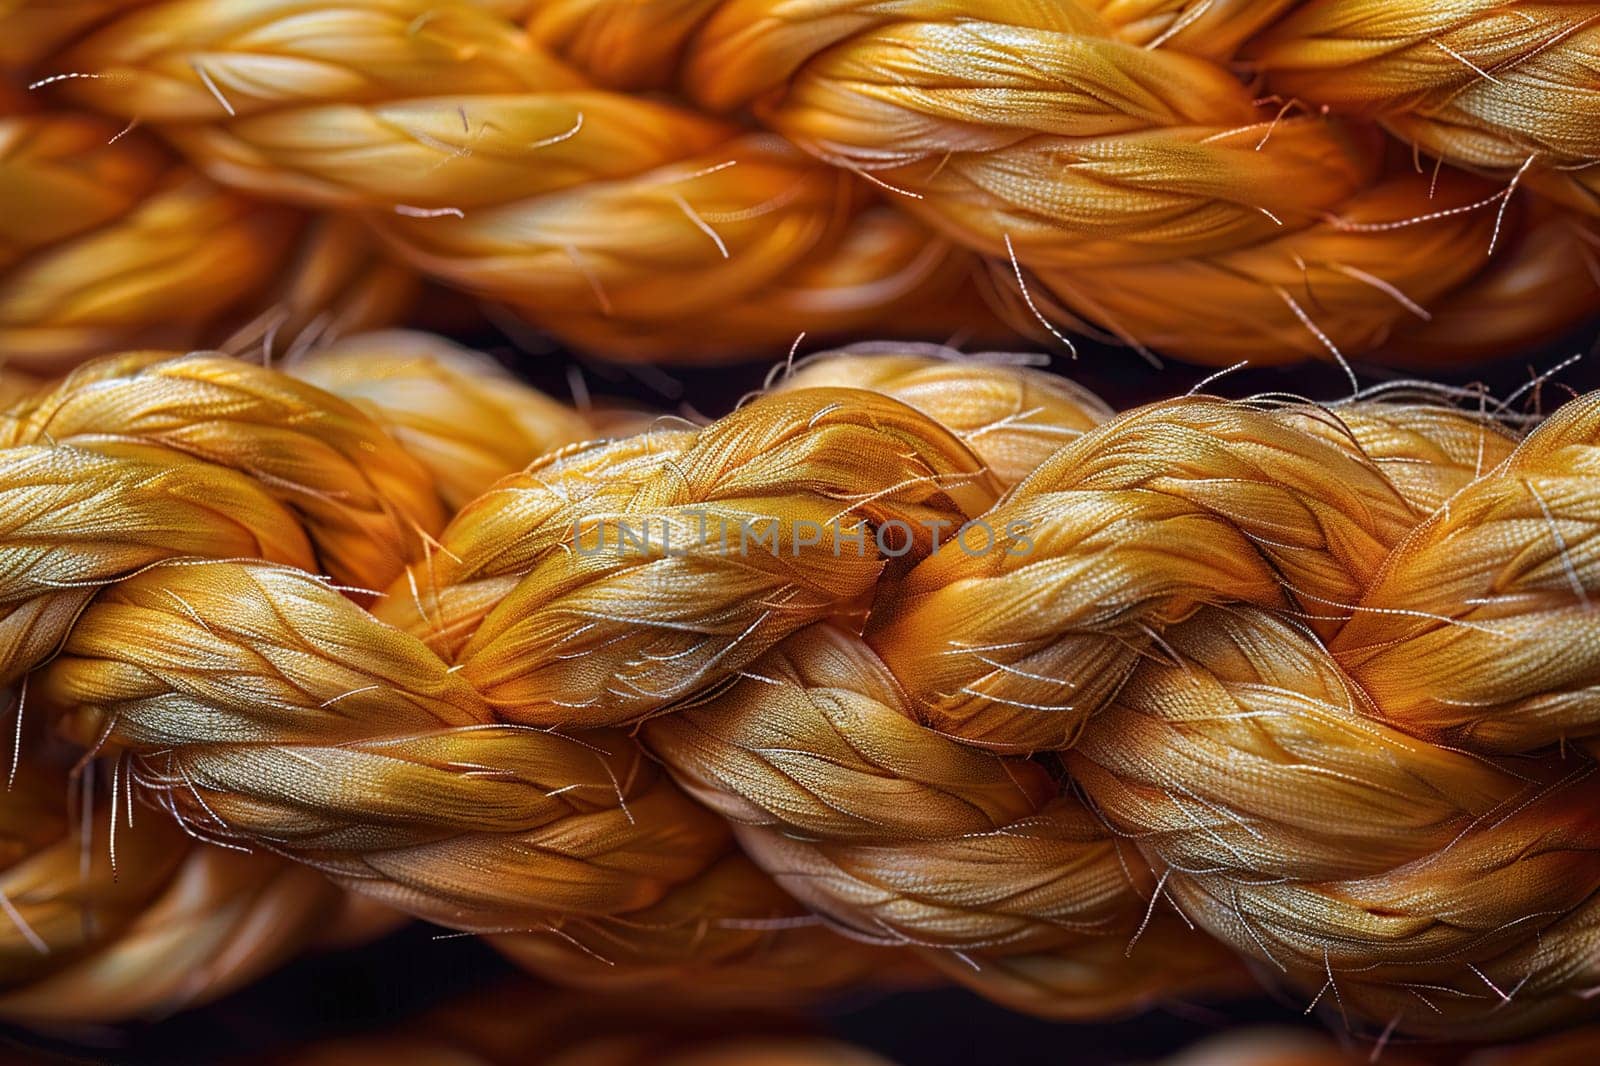 Macro image of a rope with fibers.